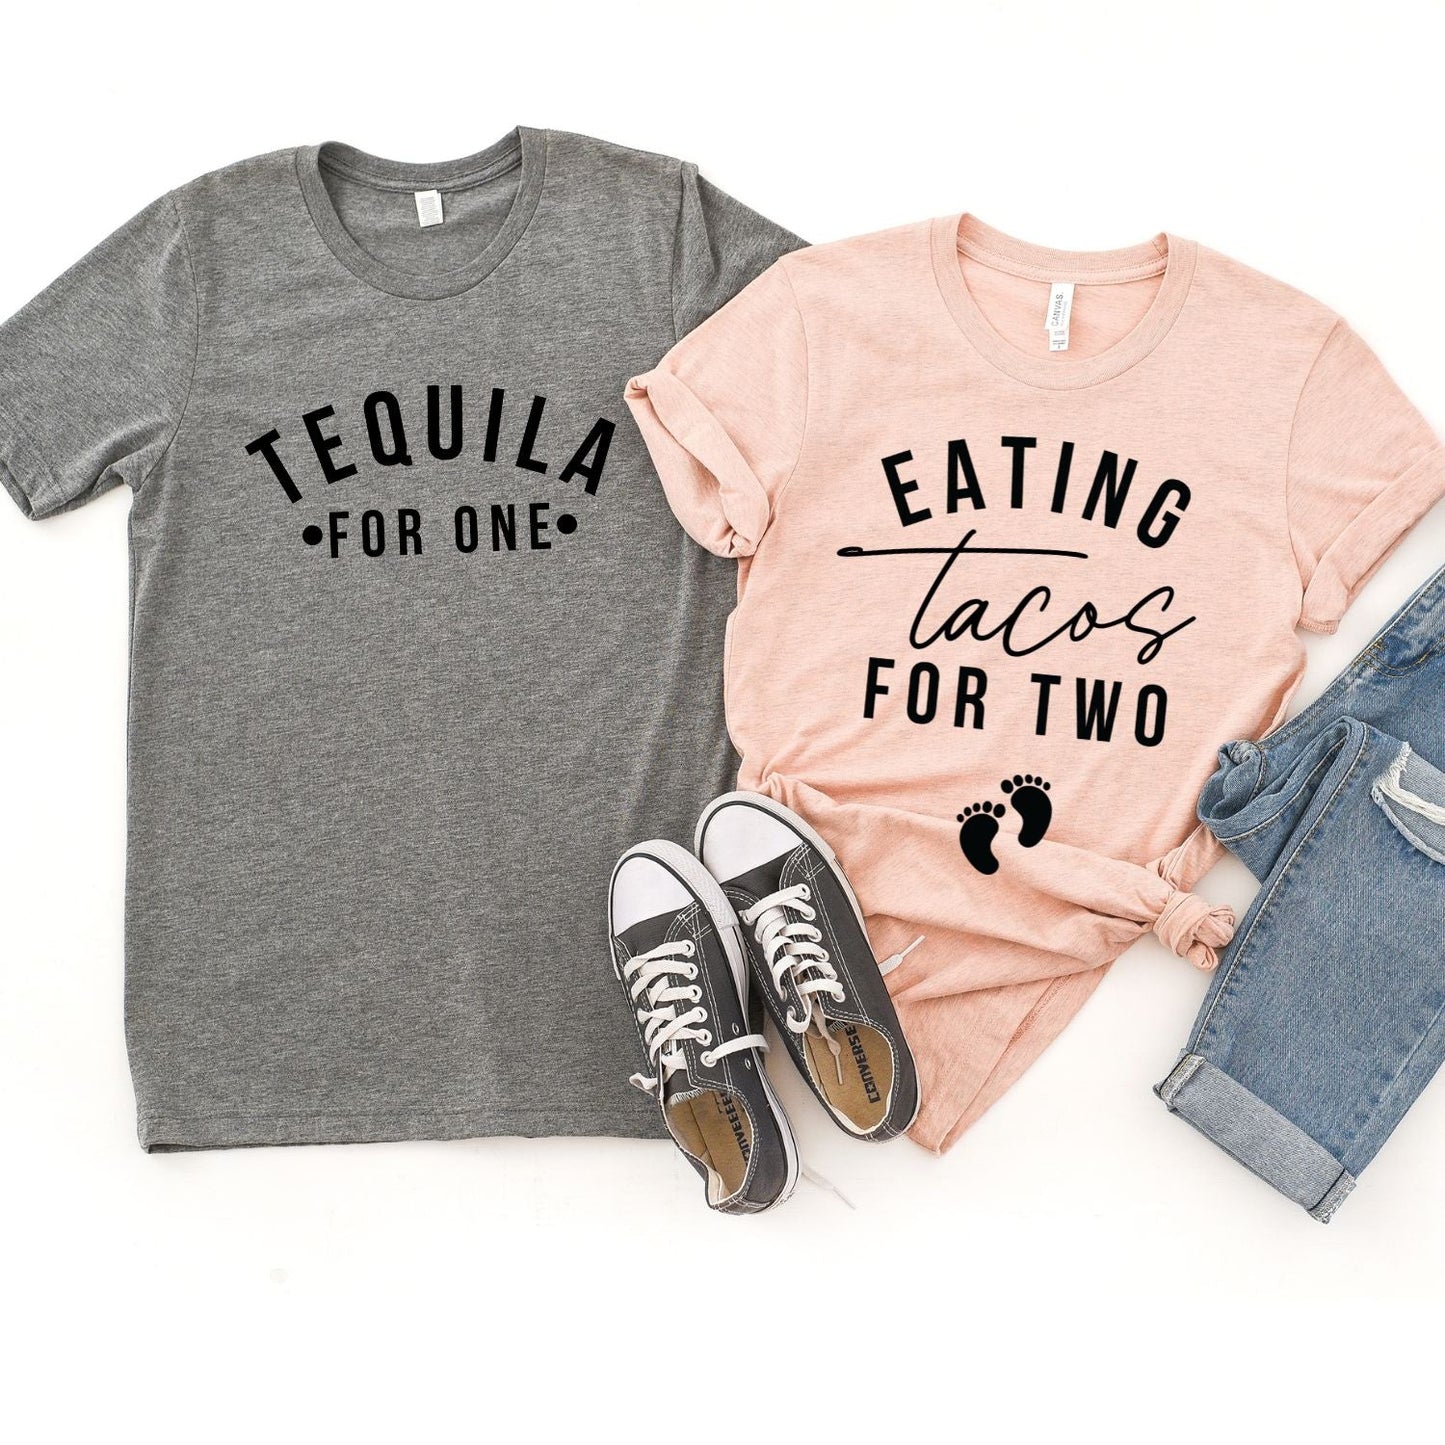 EATING TACOS FOR TWO | TEQUILA FOR ONE